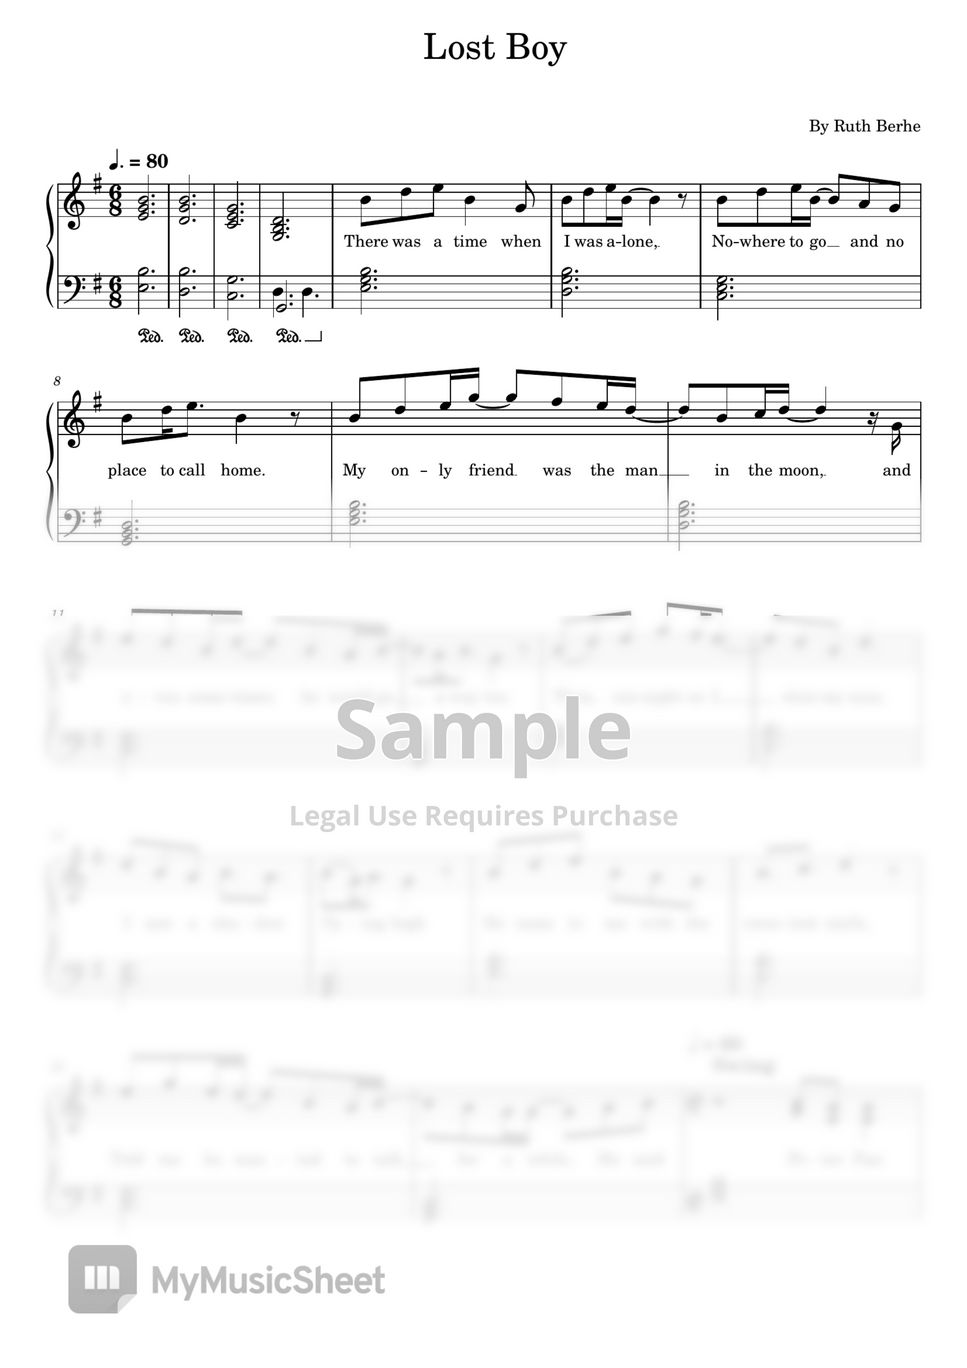 Ruth Berhe - Lost Boy (Lost Boy,Ruth B,Sheet Music For Easy Piano) by poon